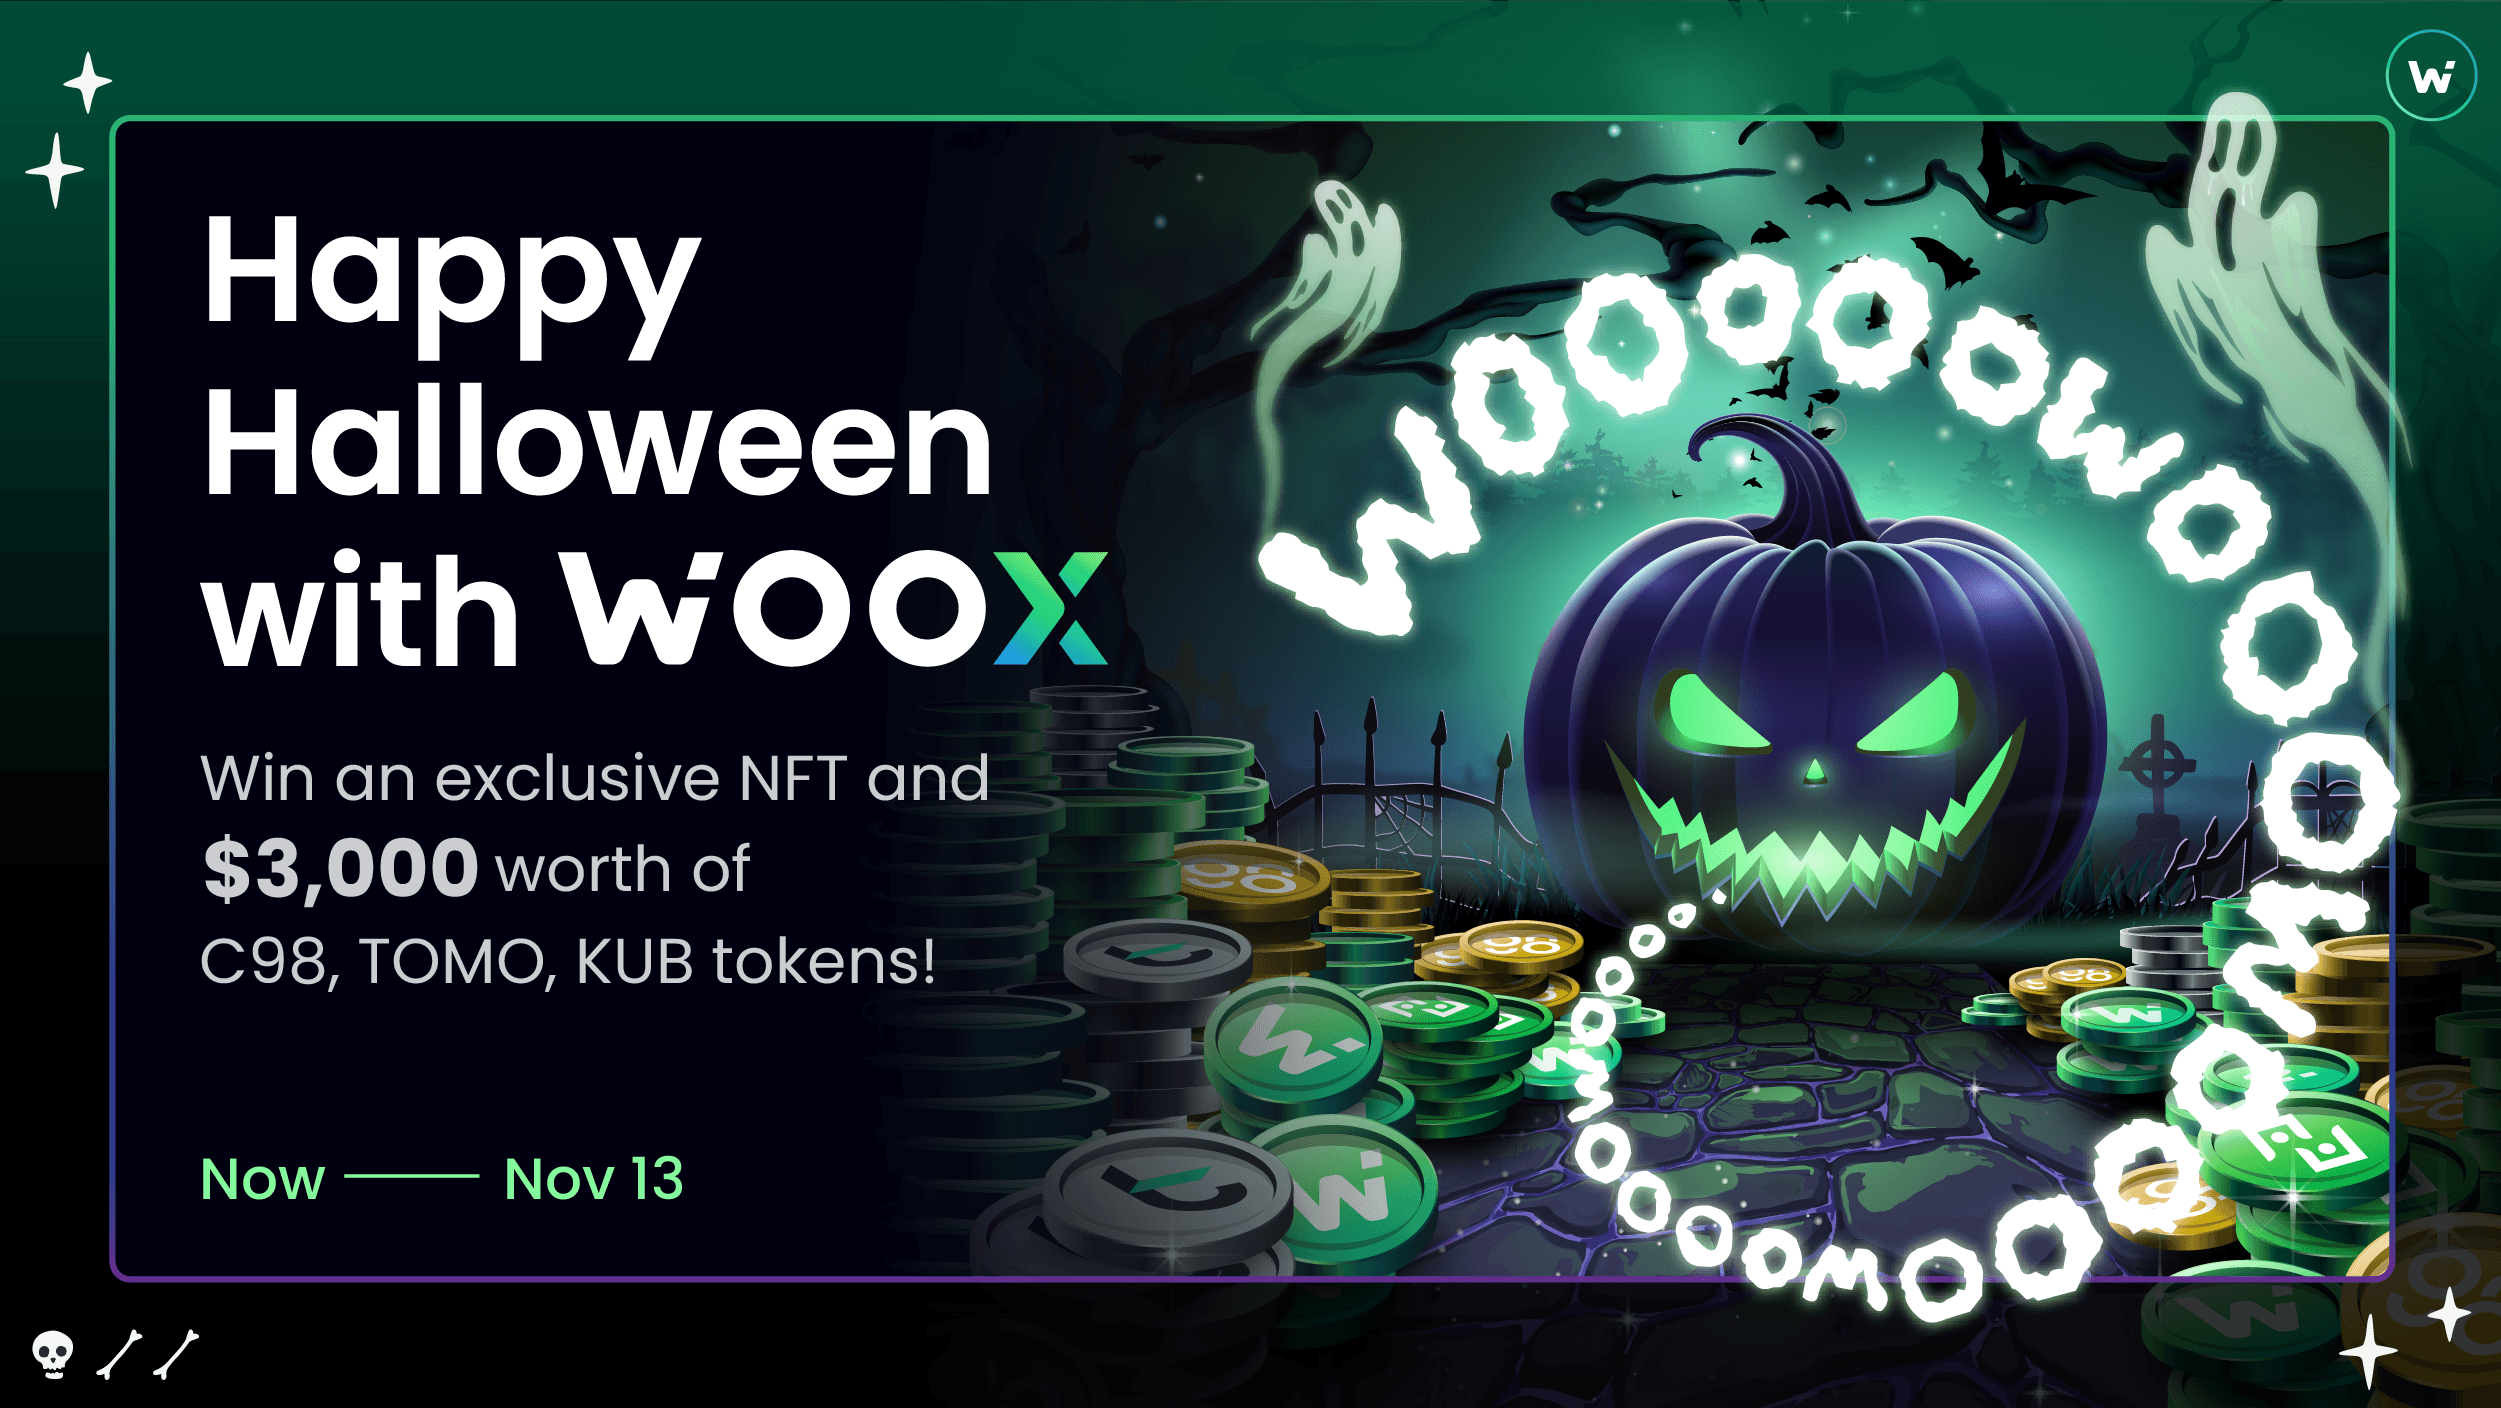 Celebrate Halloween with WOO X to win an Exclusive NFT and Tokens